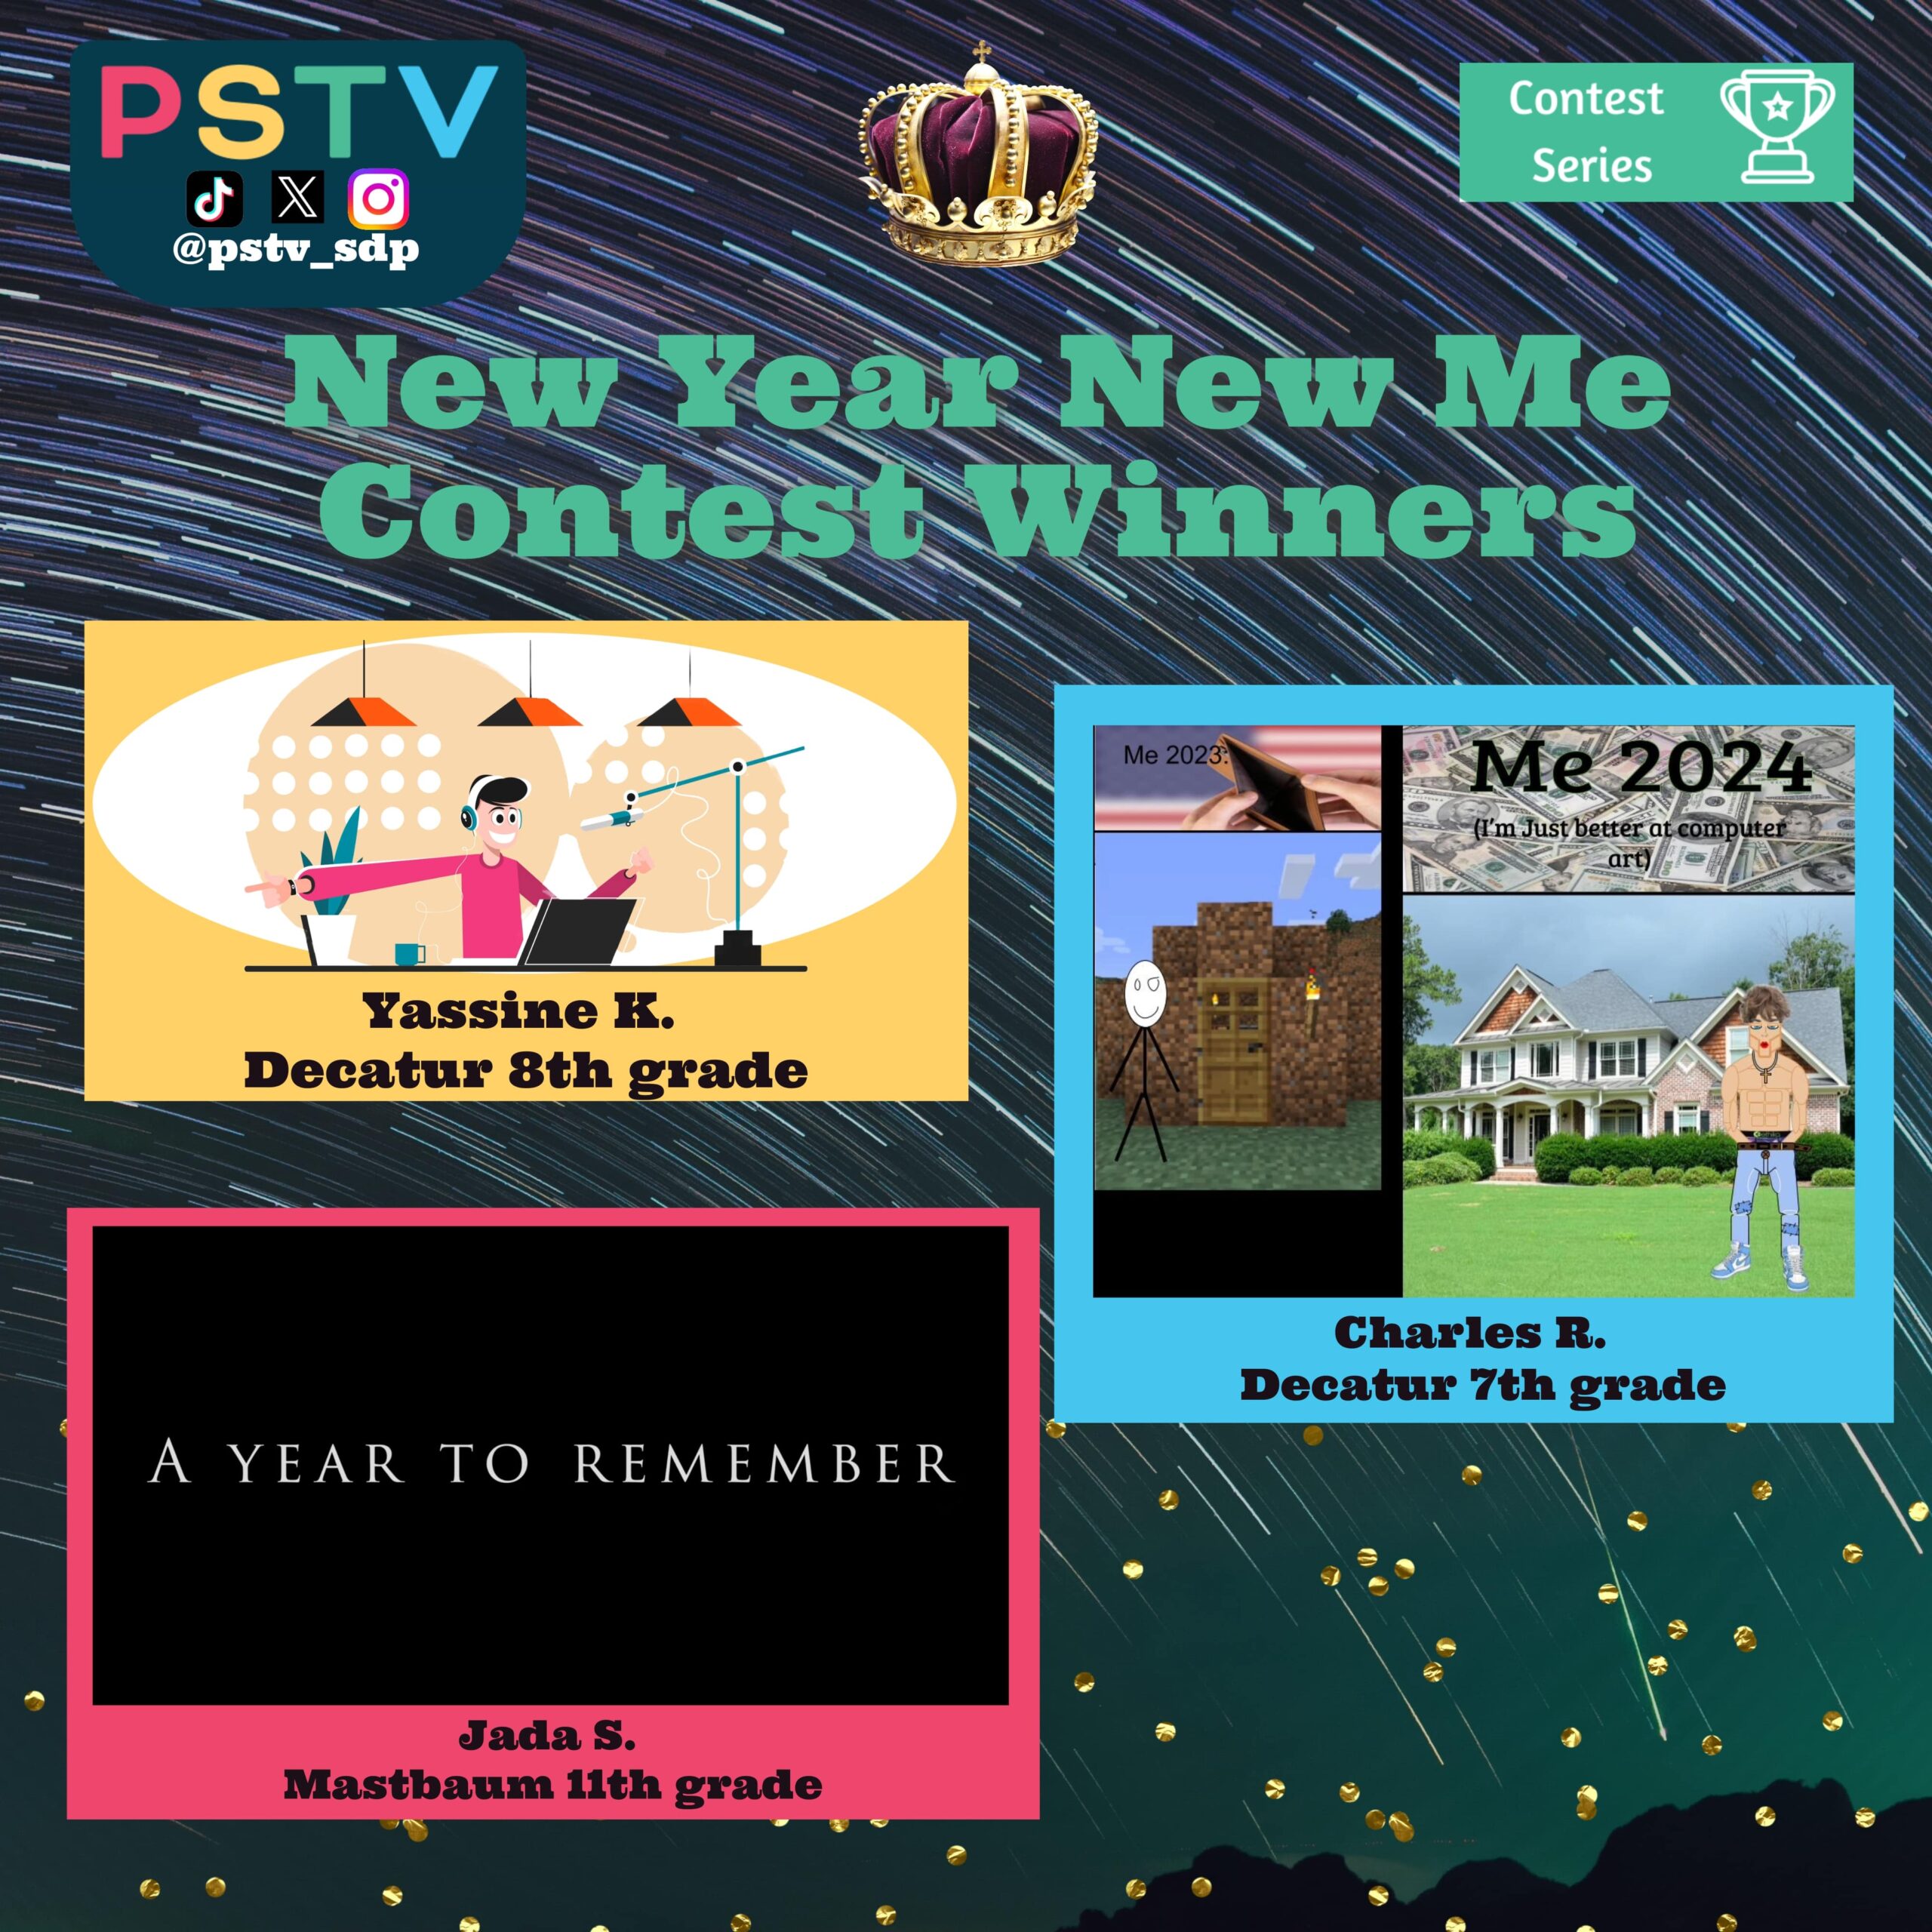 The 3 winners of the New Year New Me Contest.